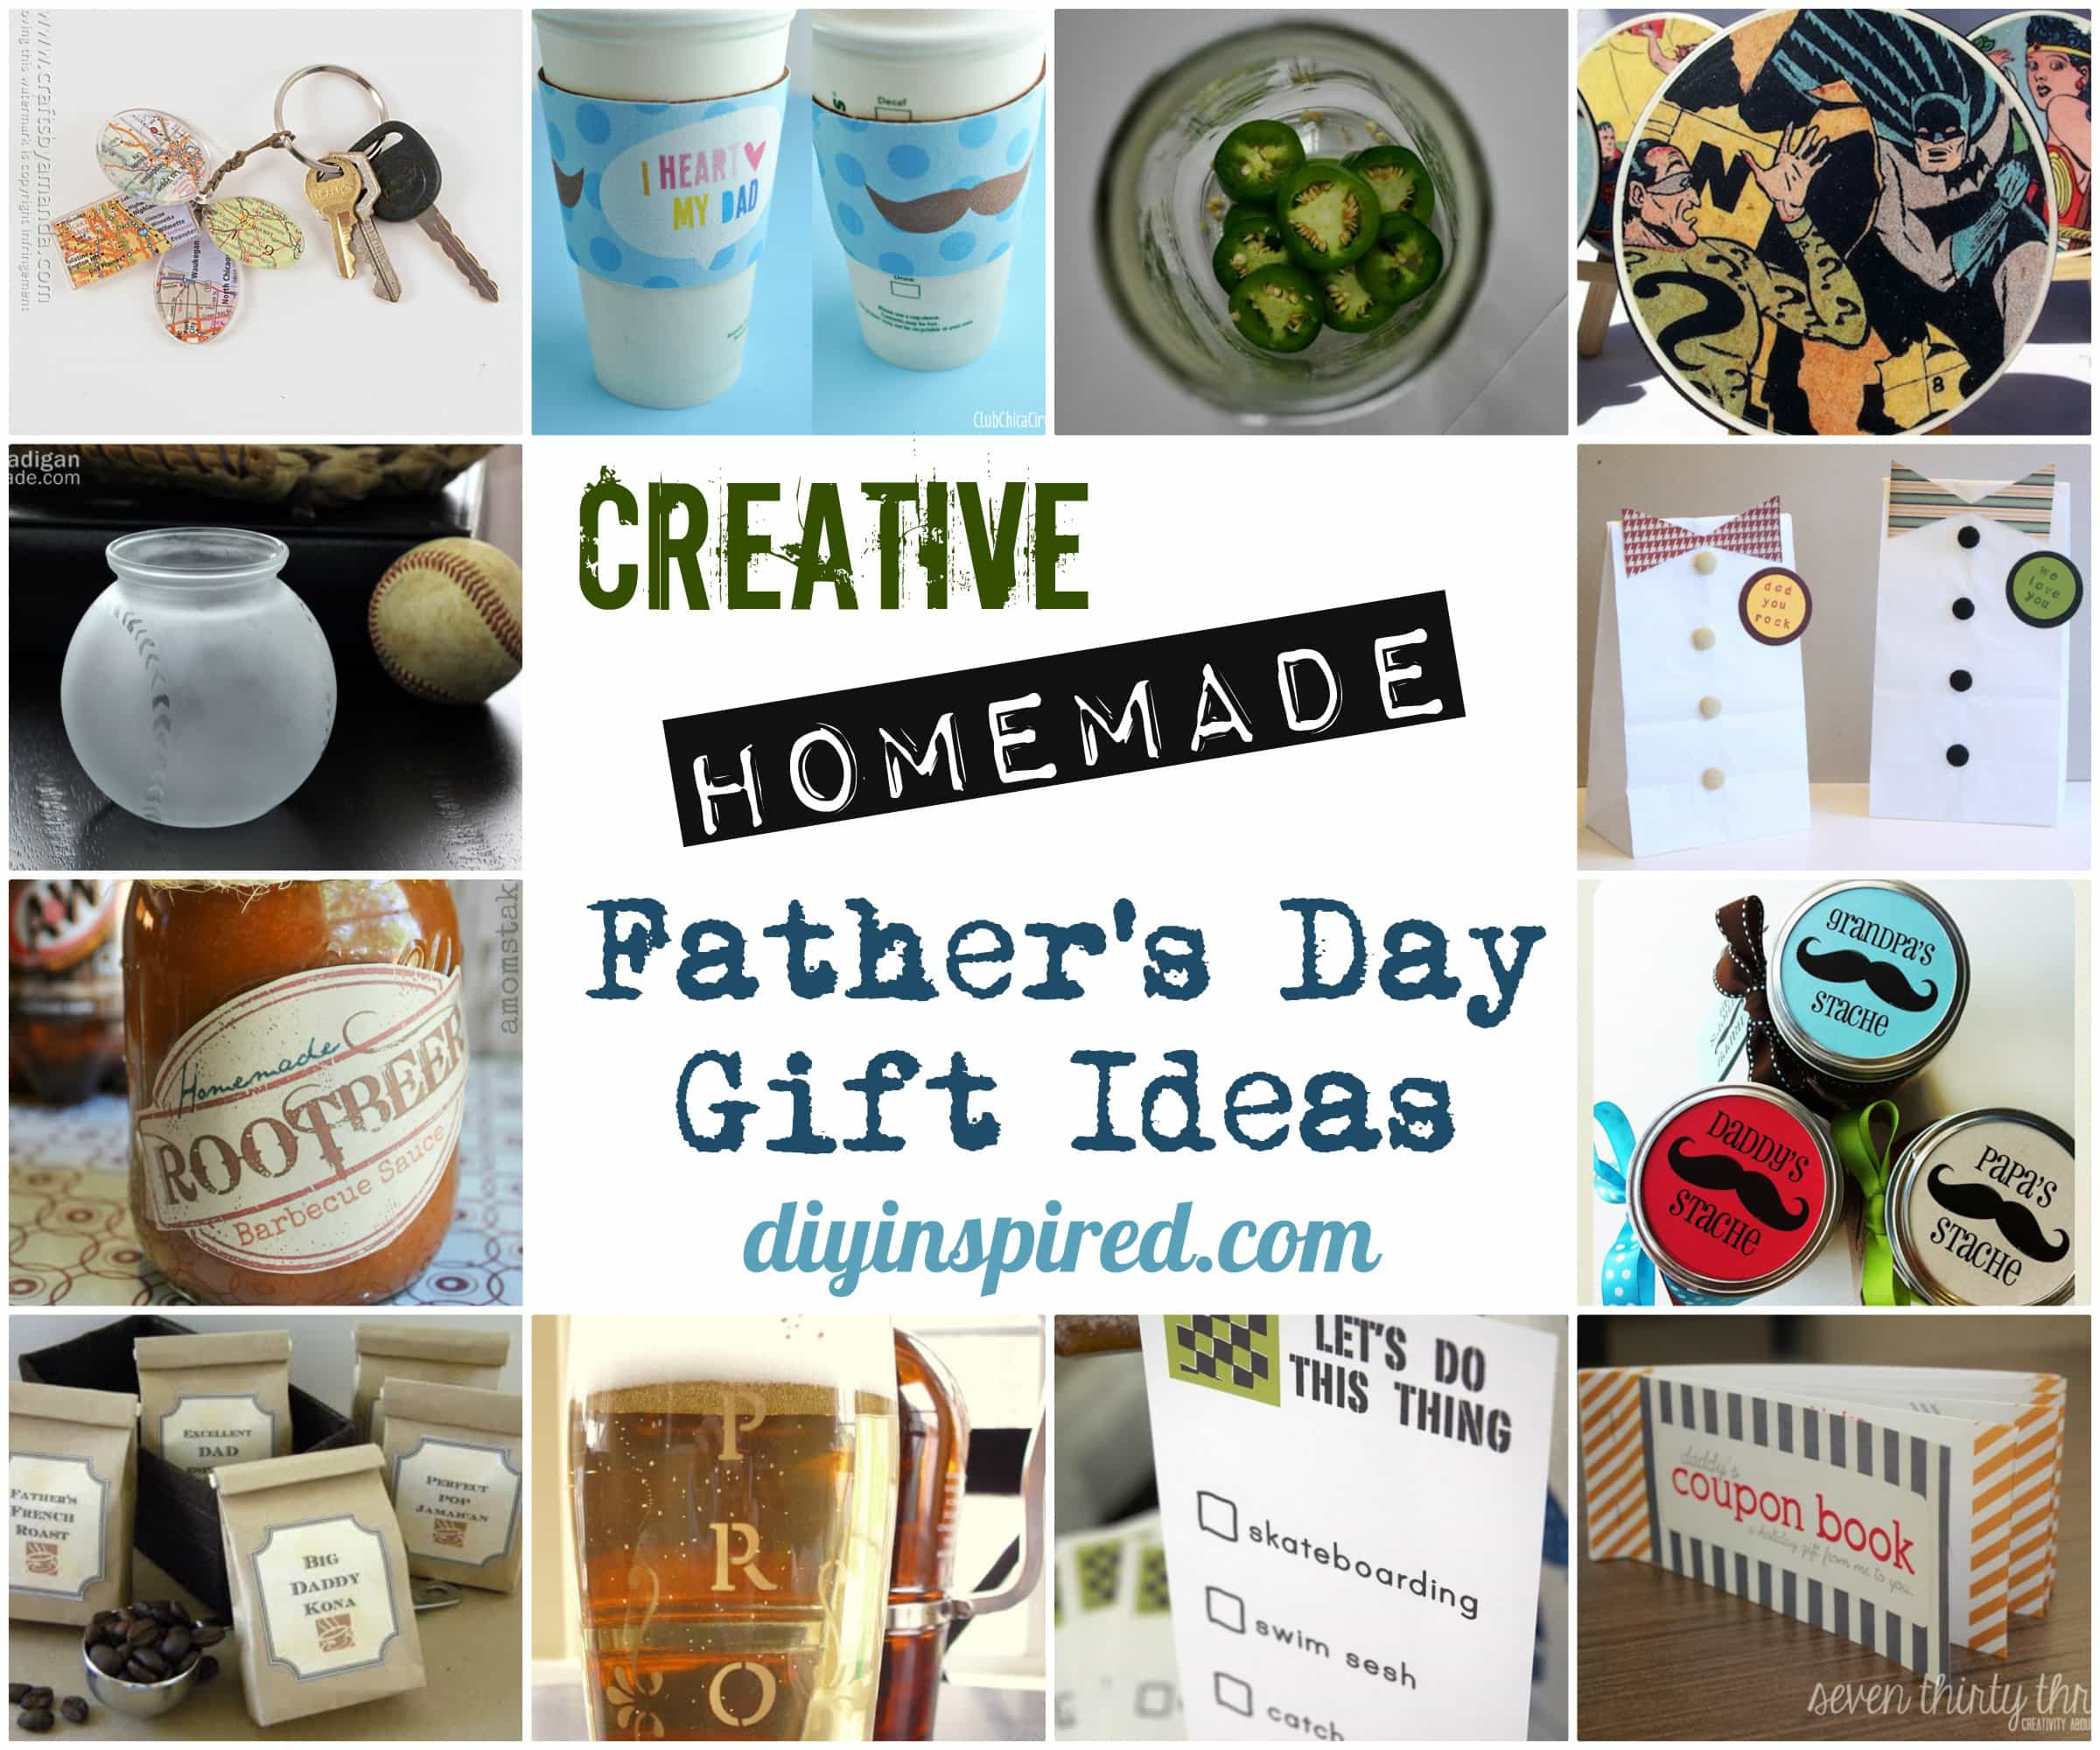 DIY Gift Ideas For Dads
 Creative Homemade Father’s Day Gift Ideas DIY Inspired